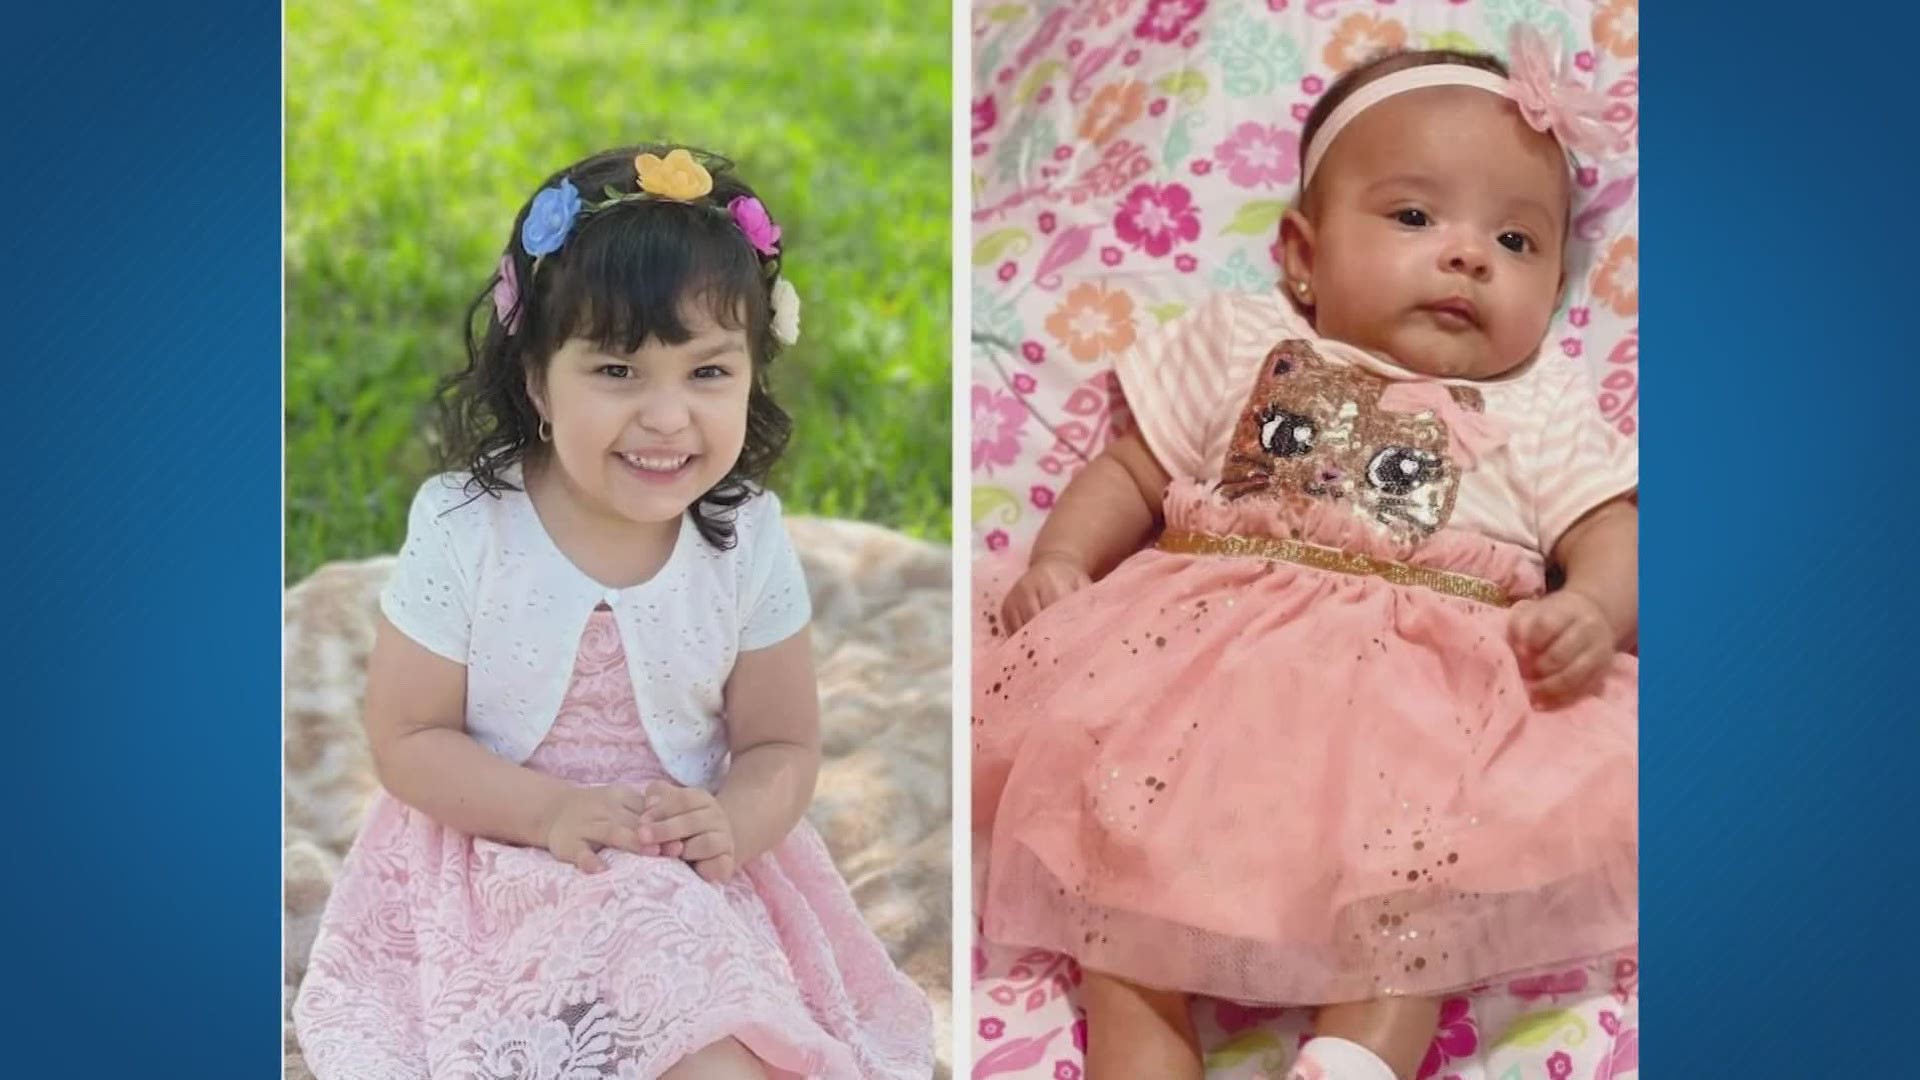 A Houston family is mourning the loss of two young children who died after they were in a terrible car accident with their mother and grandmother.